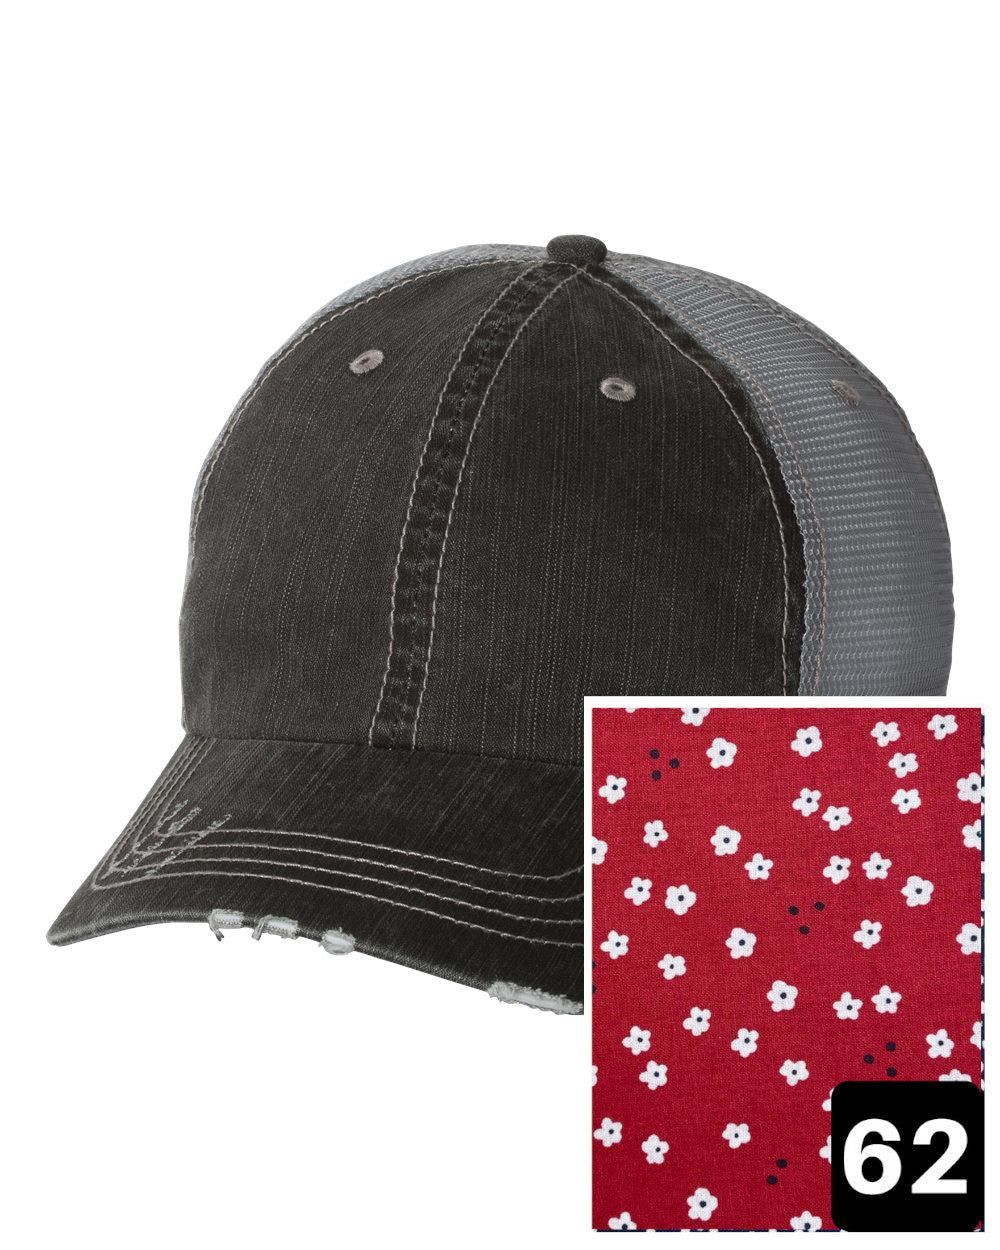 Wisconsin Hat | Gray Distressed Trucker Cap | Many Fabric Choices